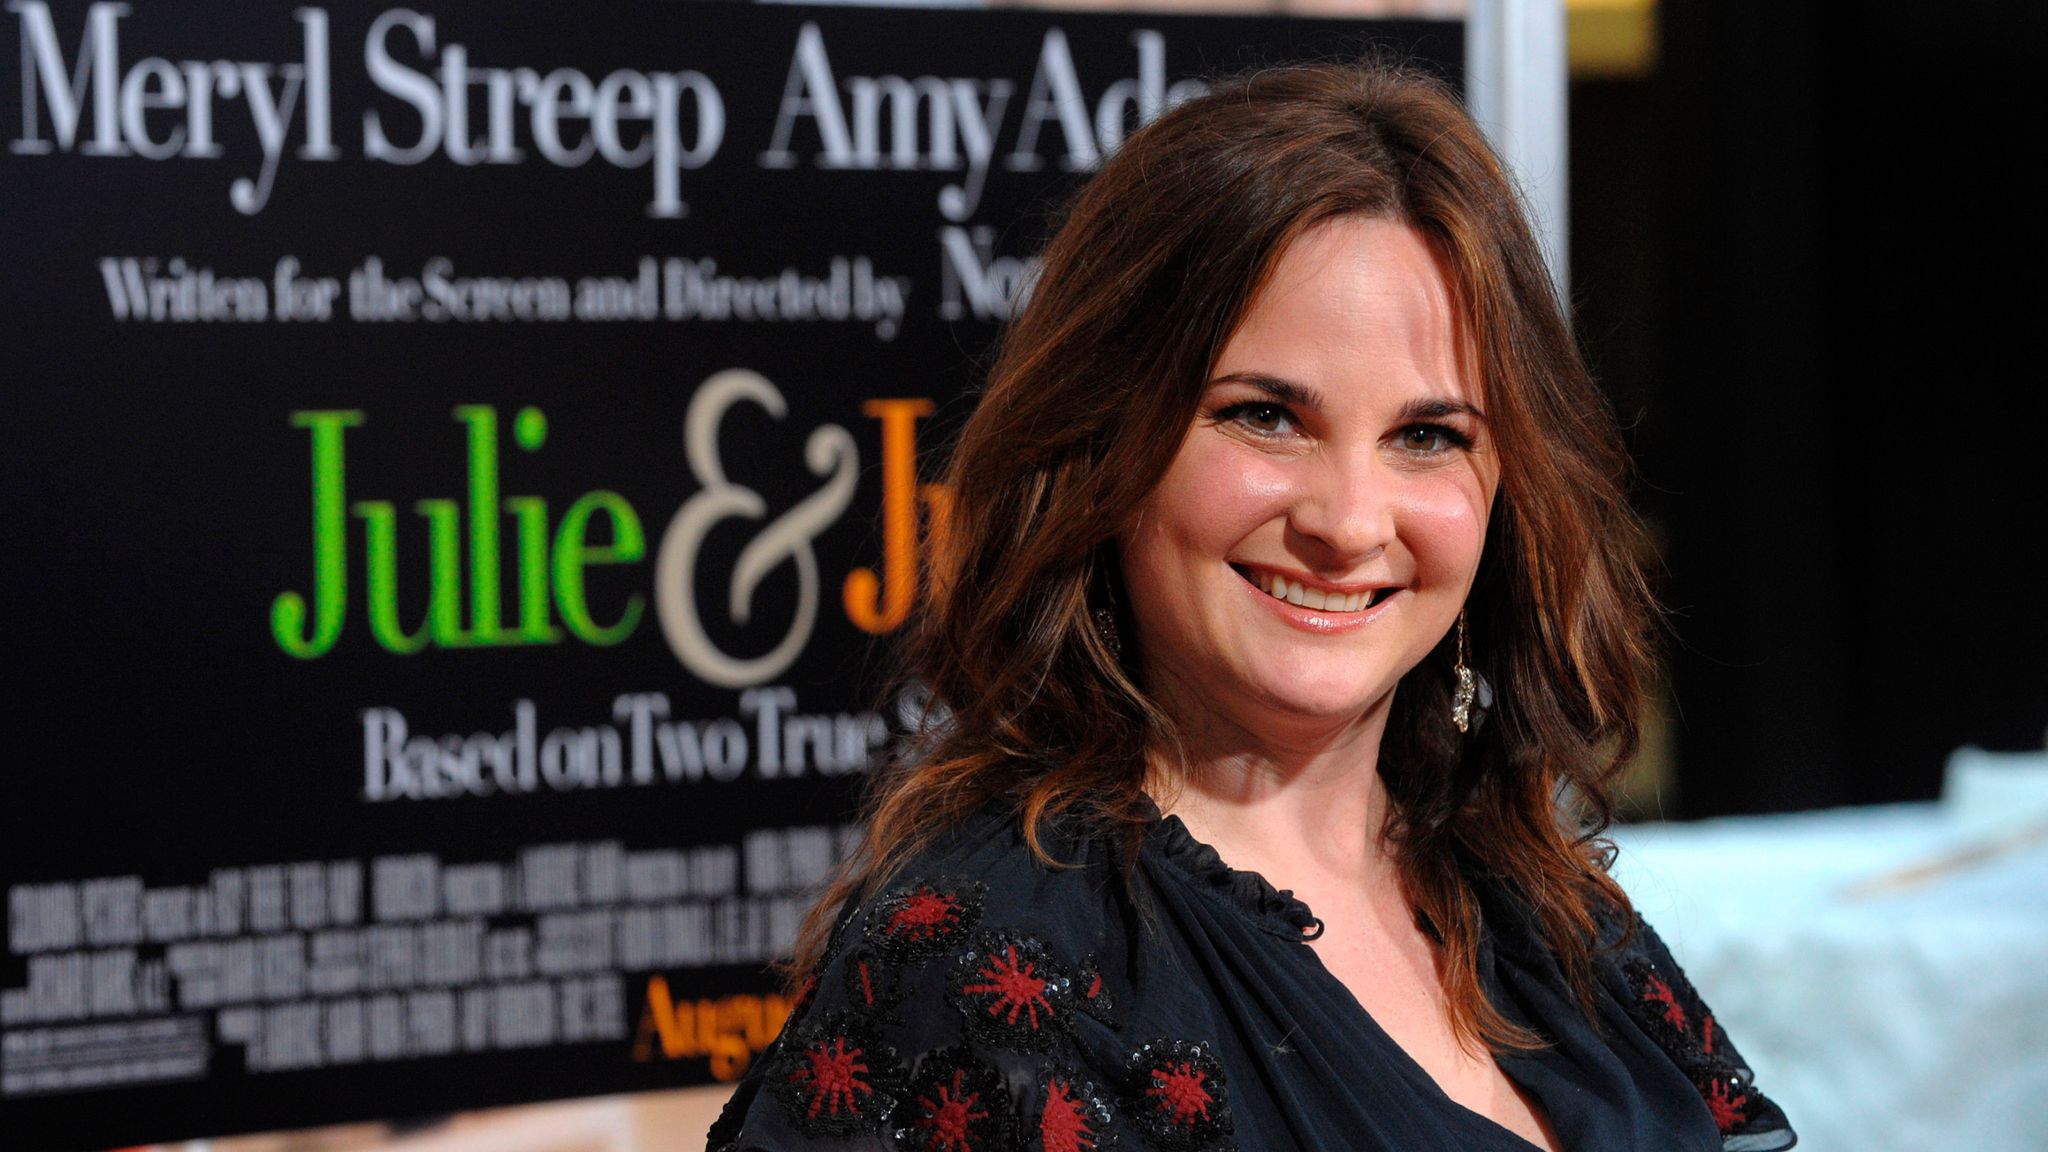 Julie Powell Who Inspired Hit Film Julie & Julia Died At The Age Of 49